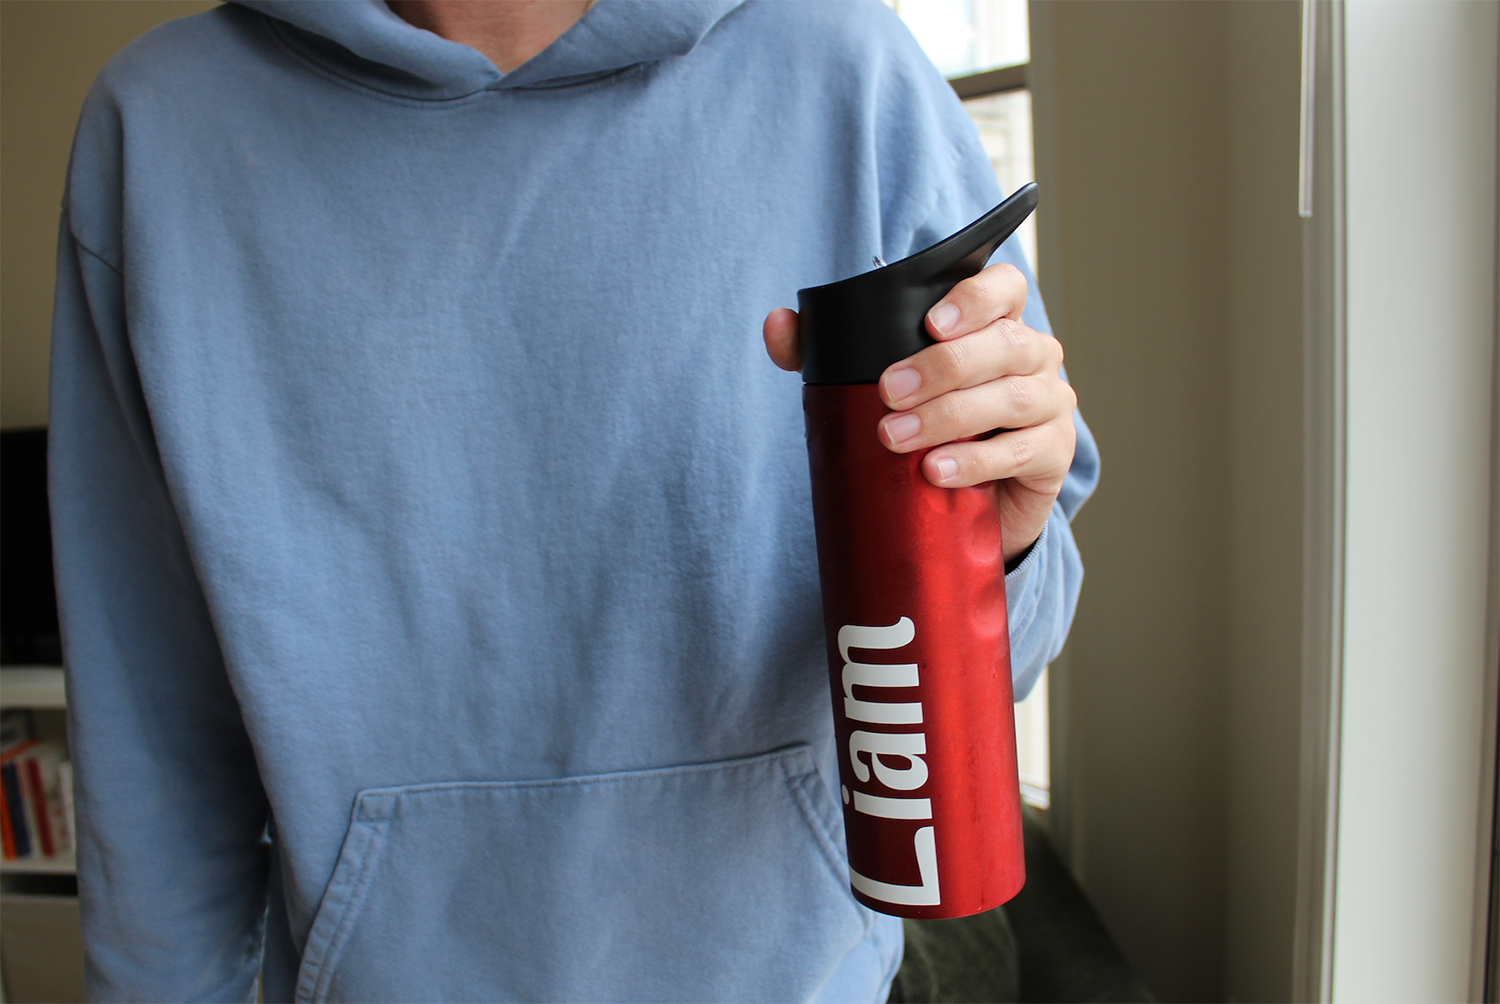 A person in a blue sweatshirt, head not pitched, holds a read metal bottle which reads "Liam."